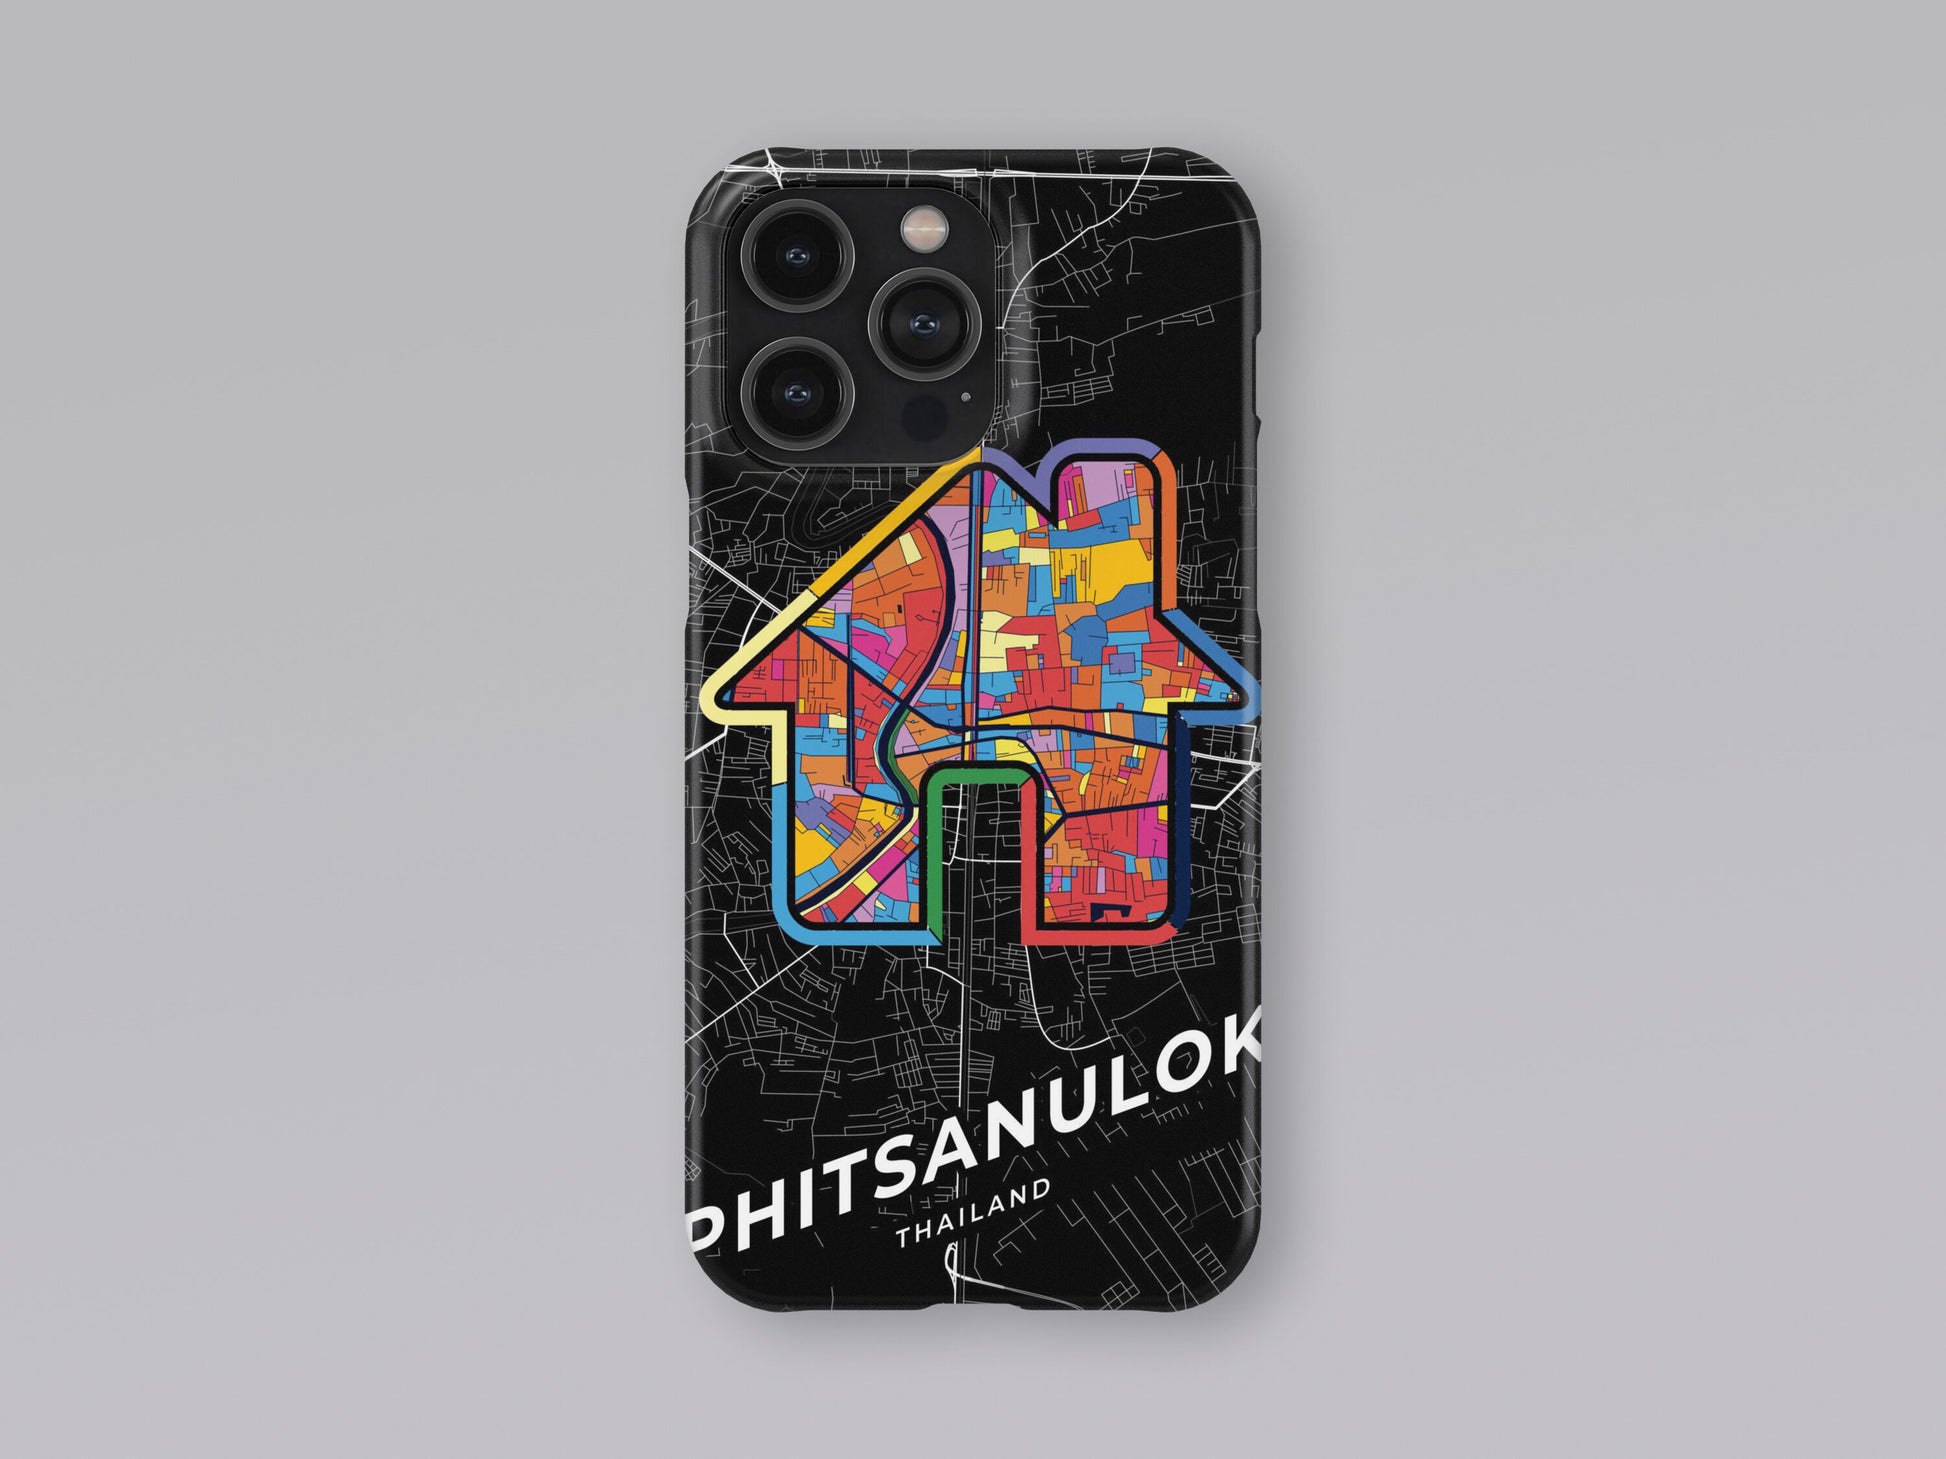 Phitsanulok Thailand slim phone case with colorful icon 3